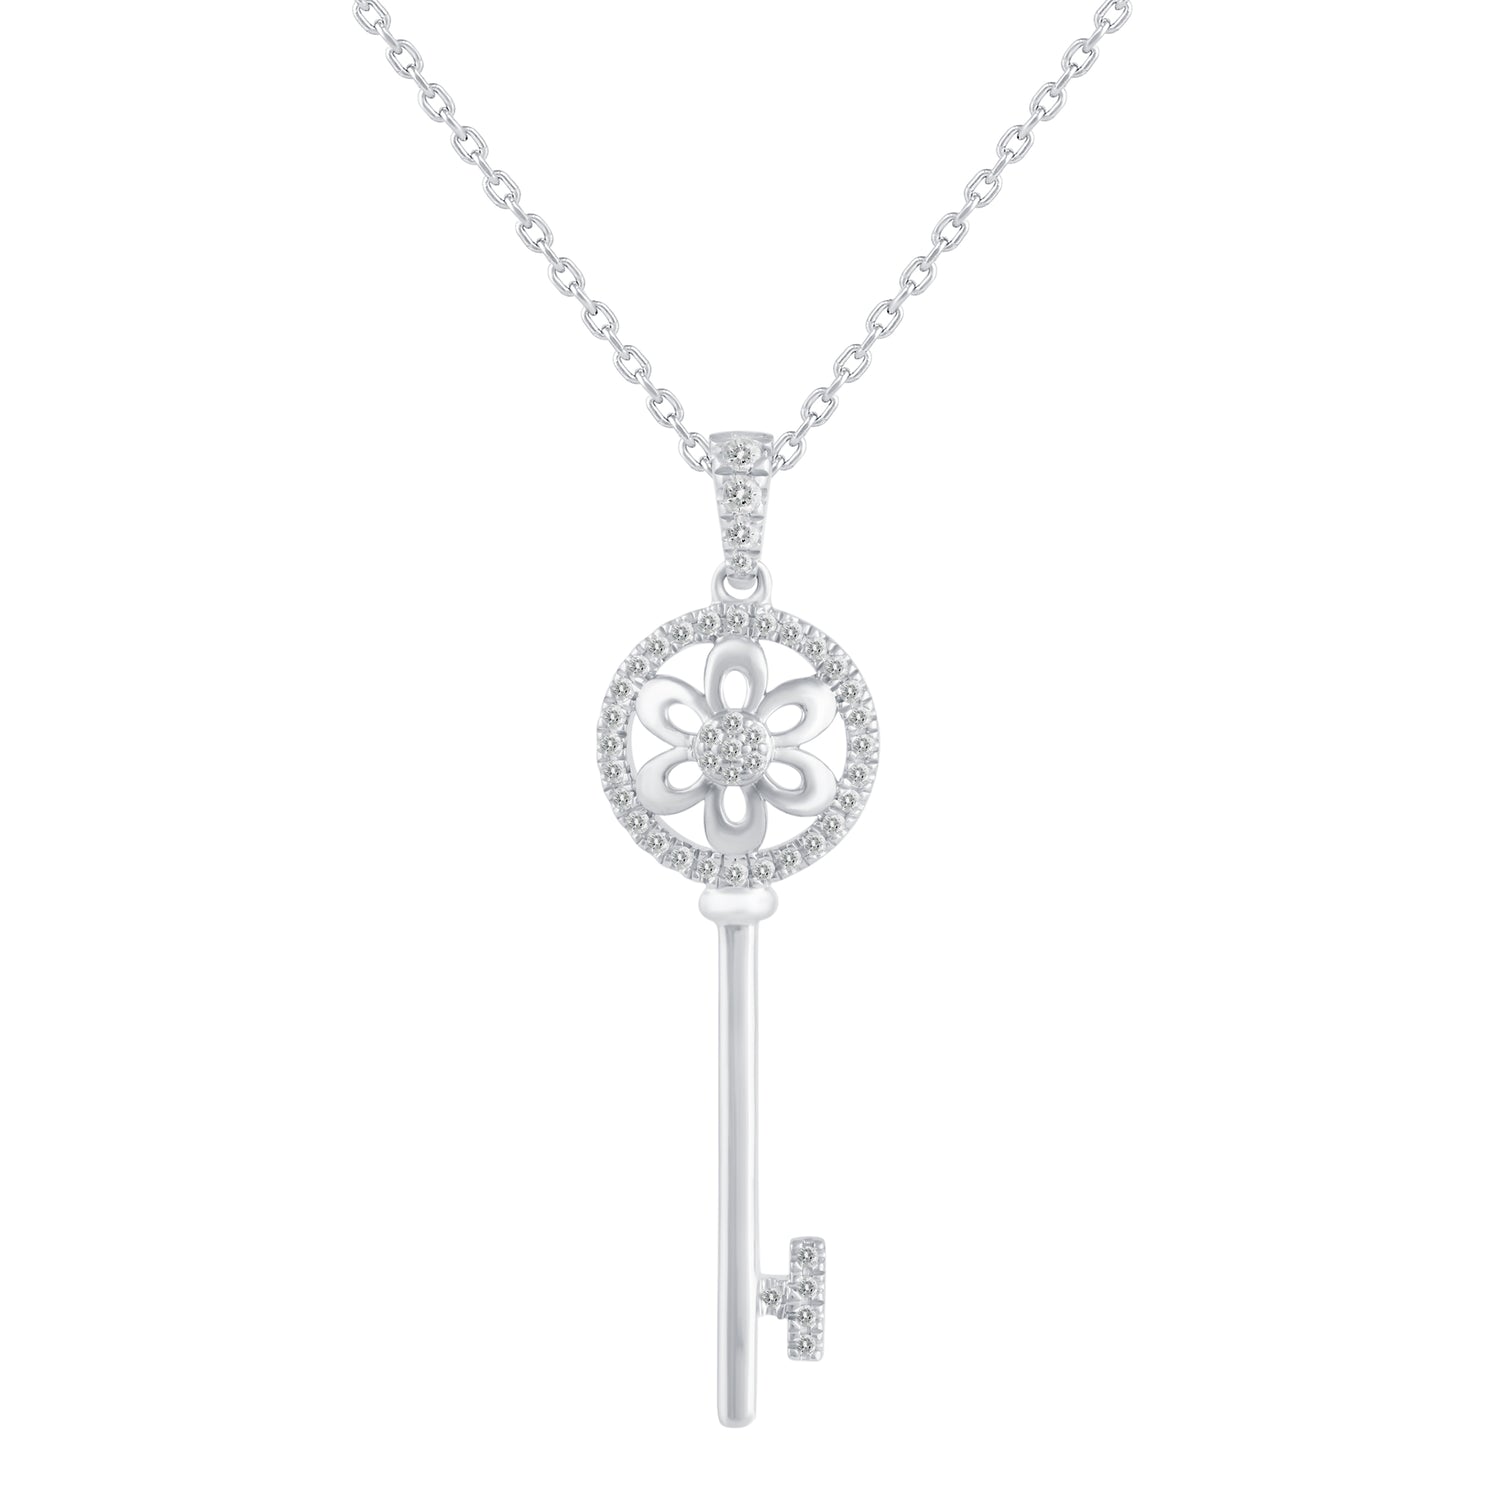 Tiffany and Co. Sterling Silver Daisy Key Pendant Necklace with